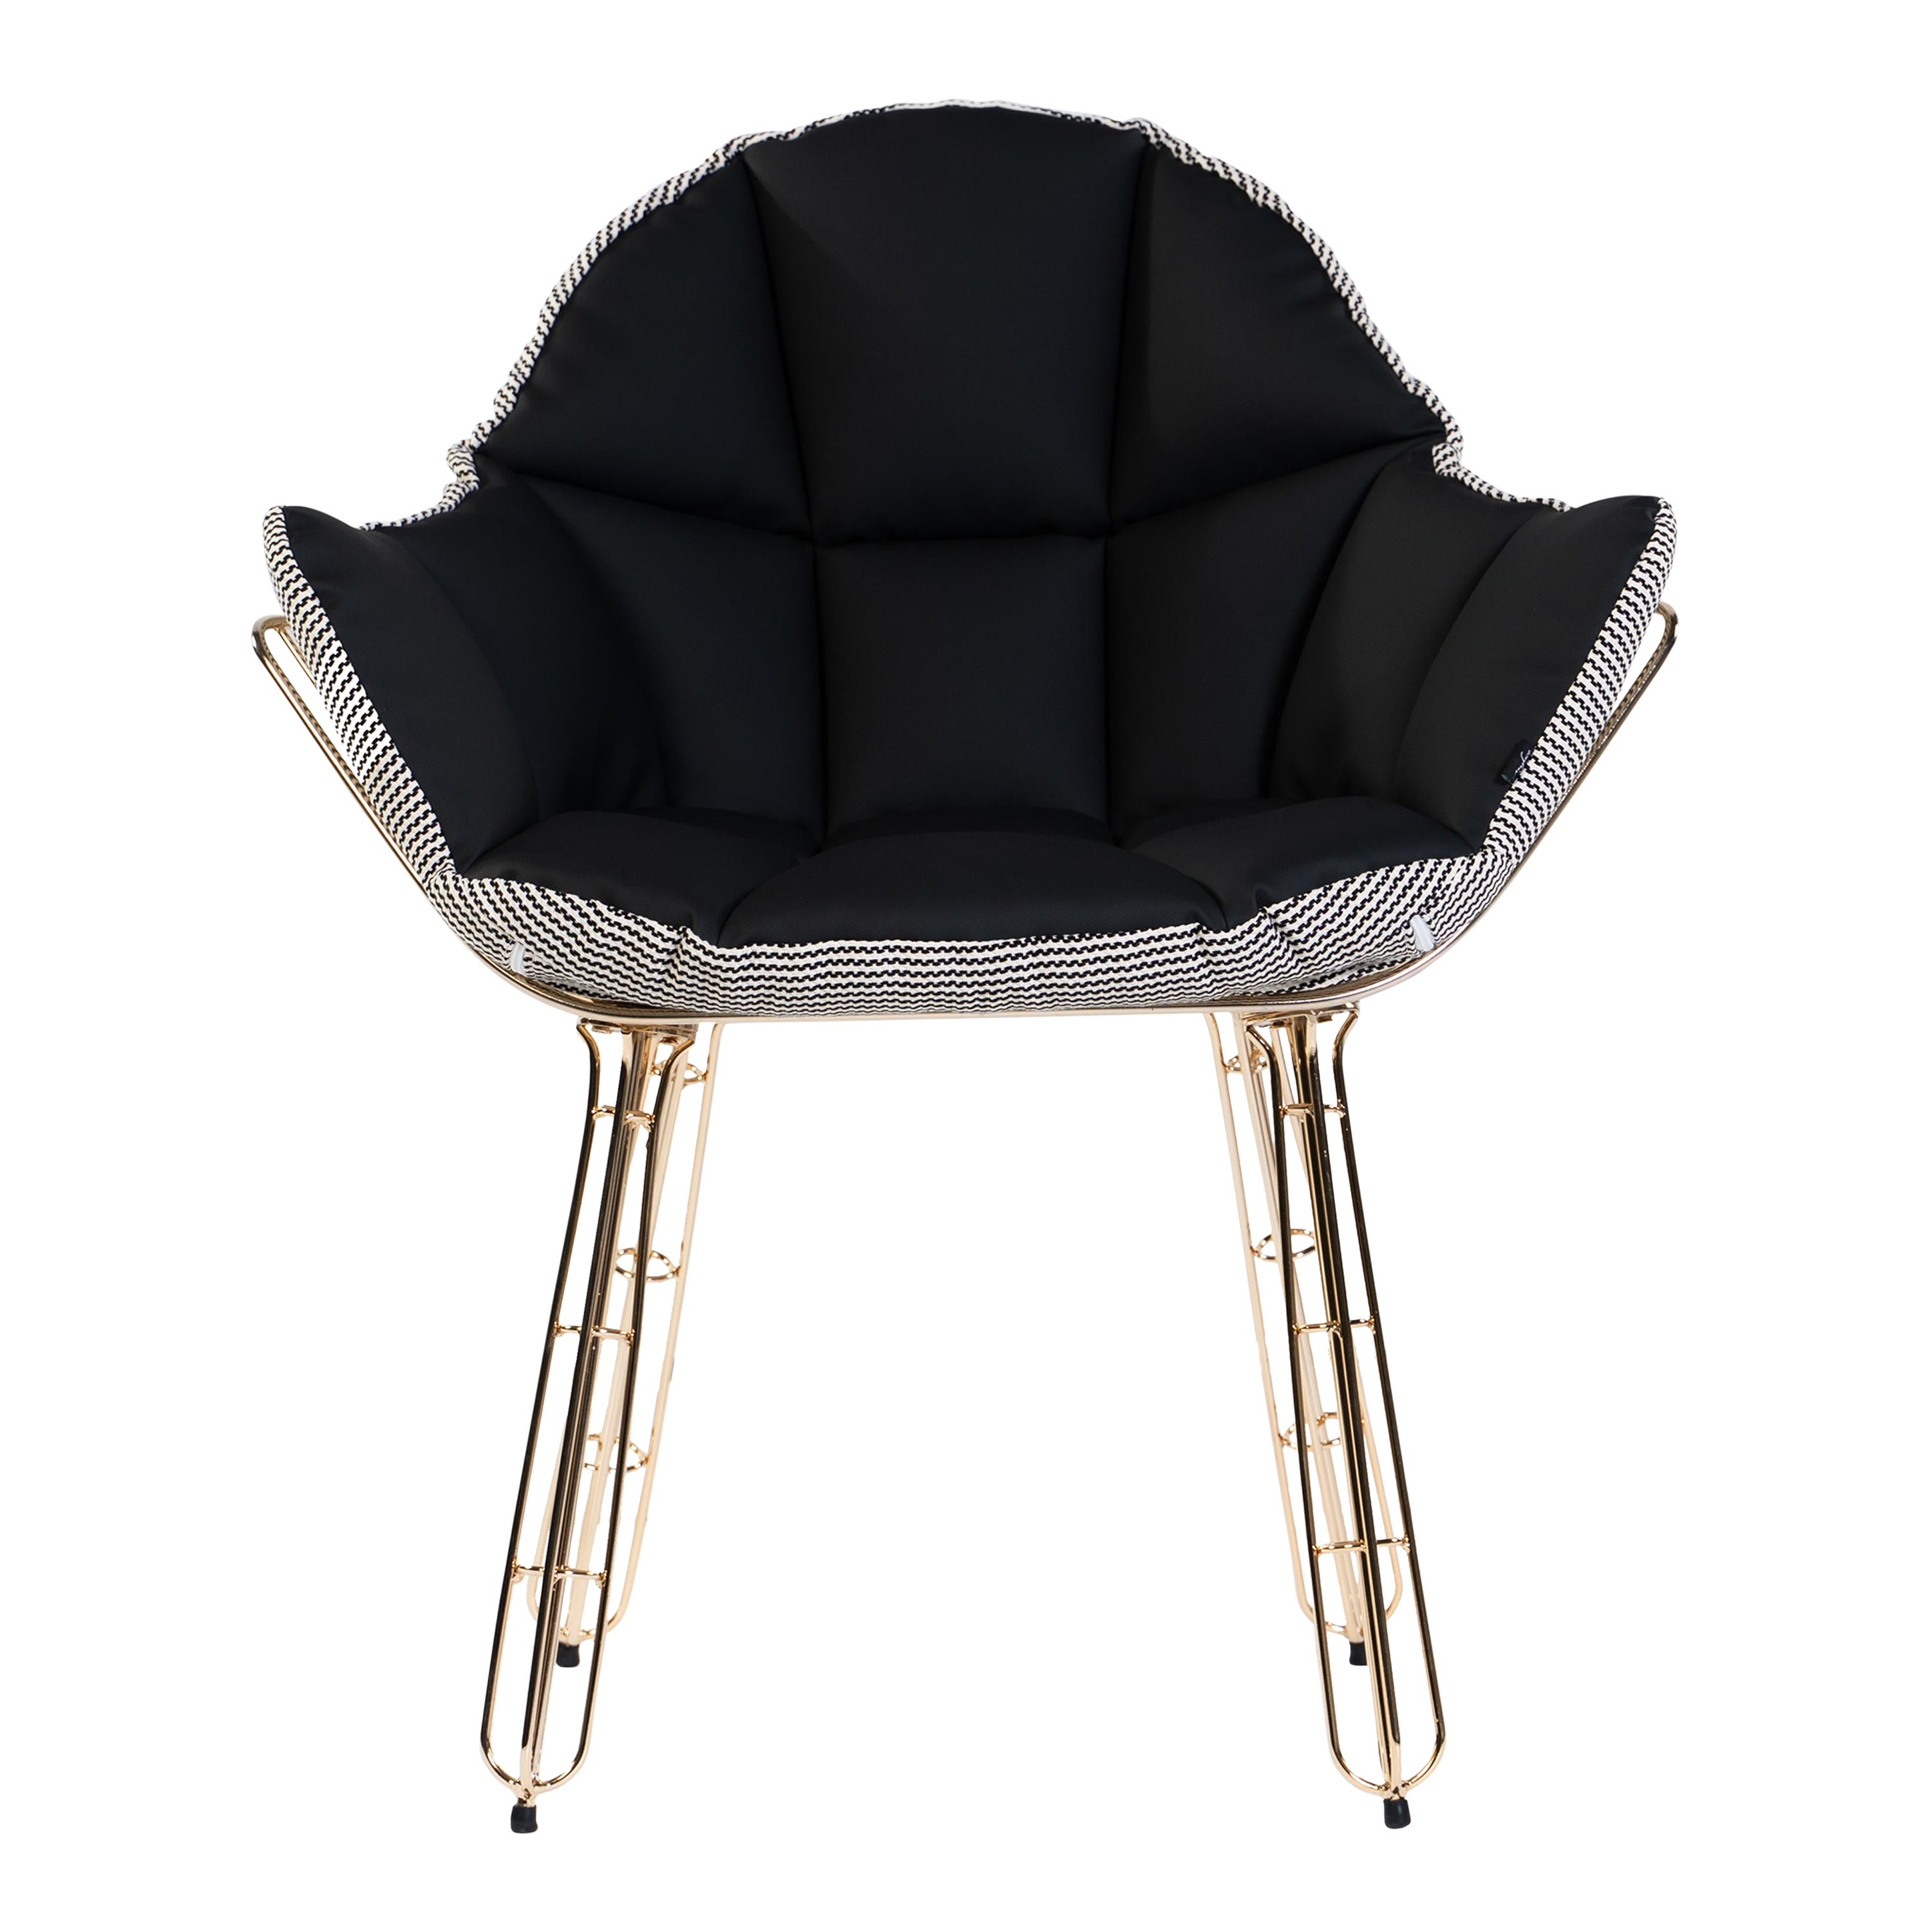 Outdoor Dining Chair with Waterproof Black Fabric and Gold-Plated Stainless Stee